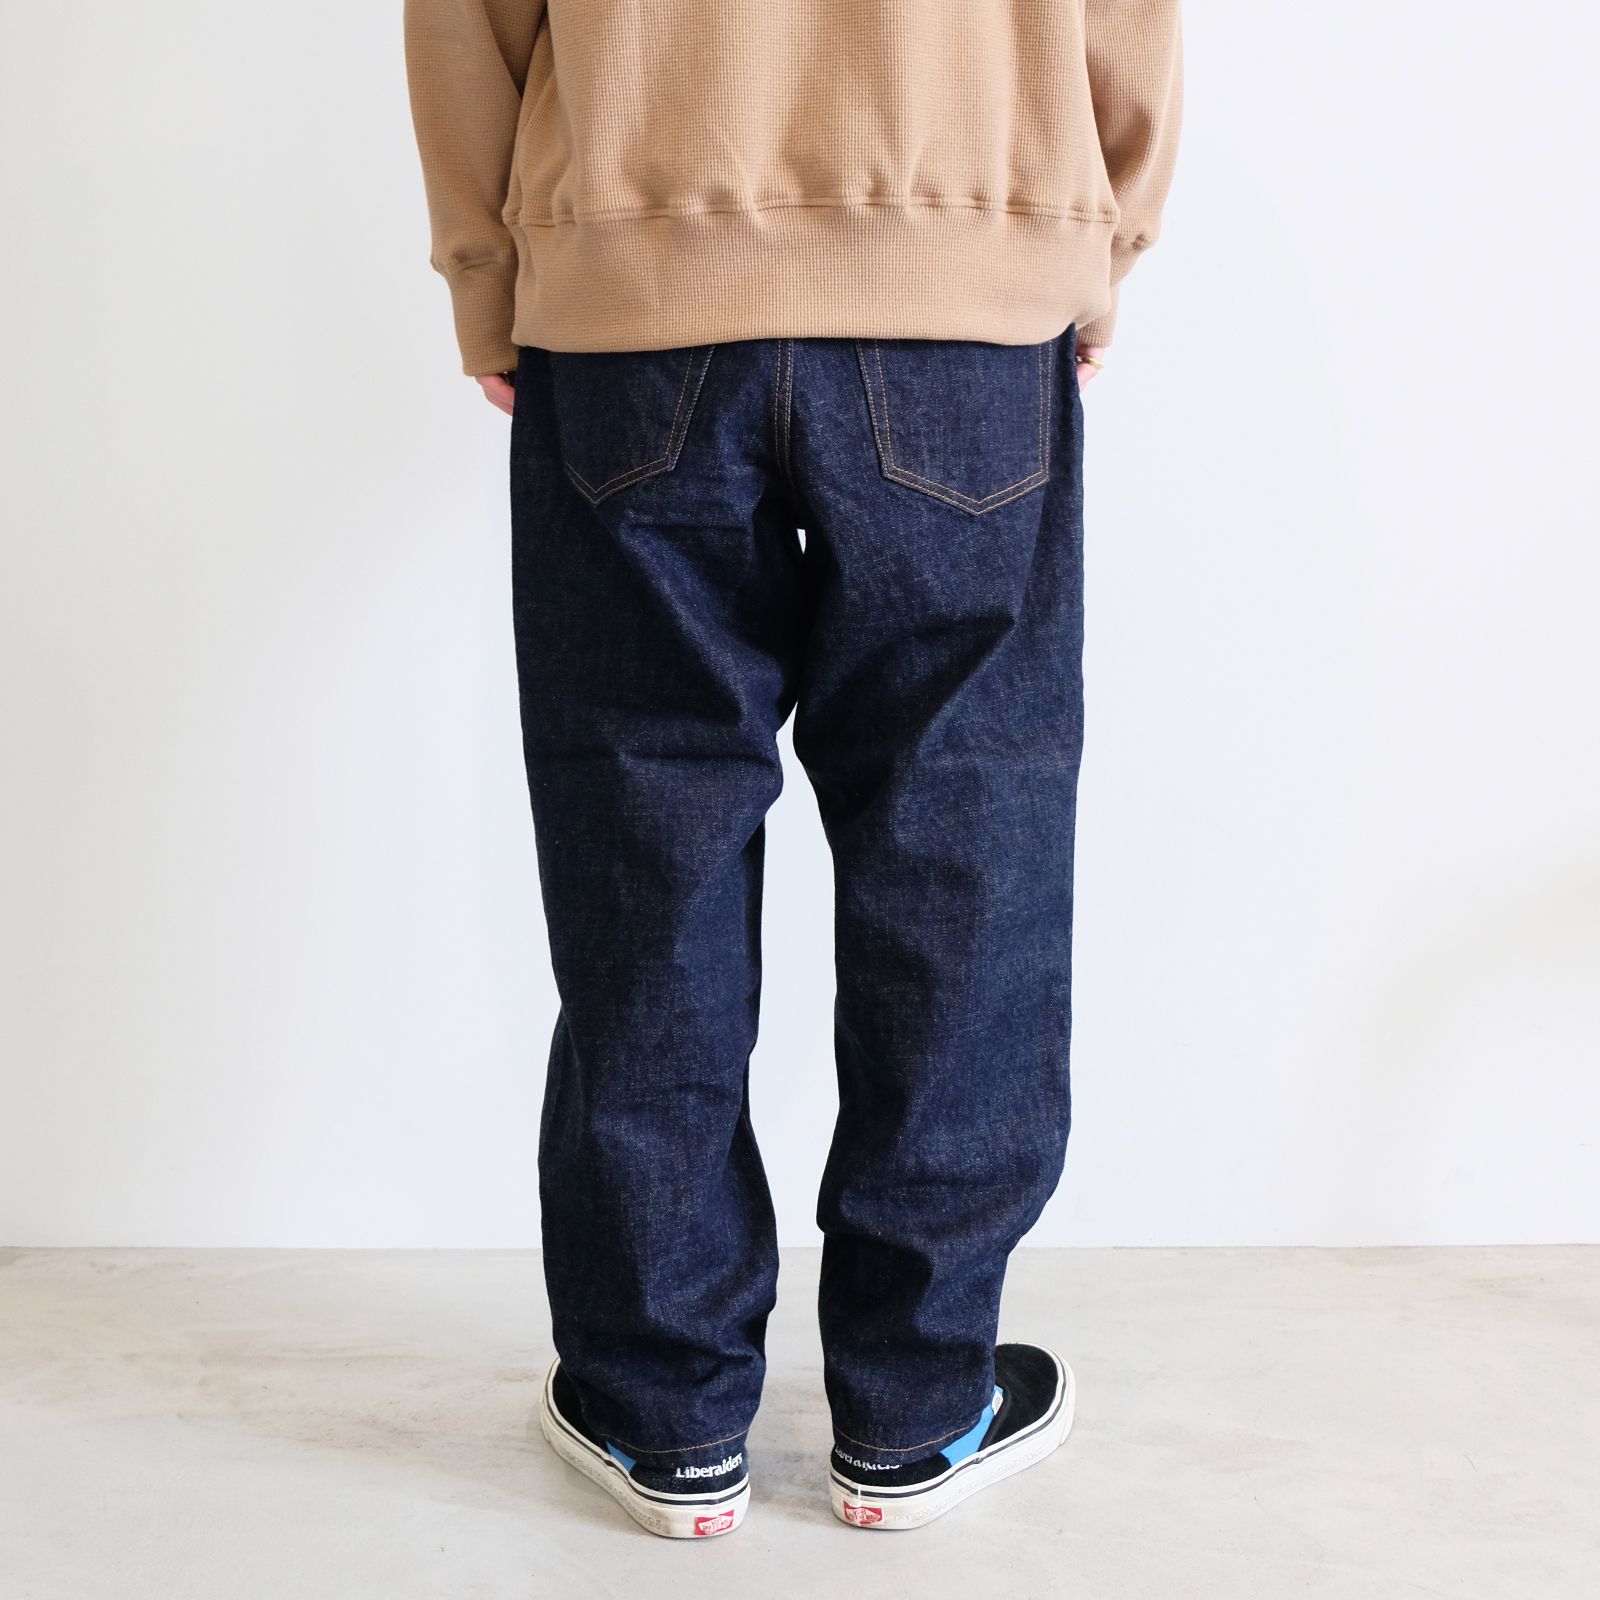 CALEE - 【ラスト1点 32 】Vintage reproduct wide silhouette denim 